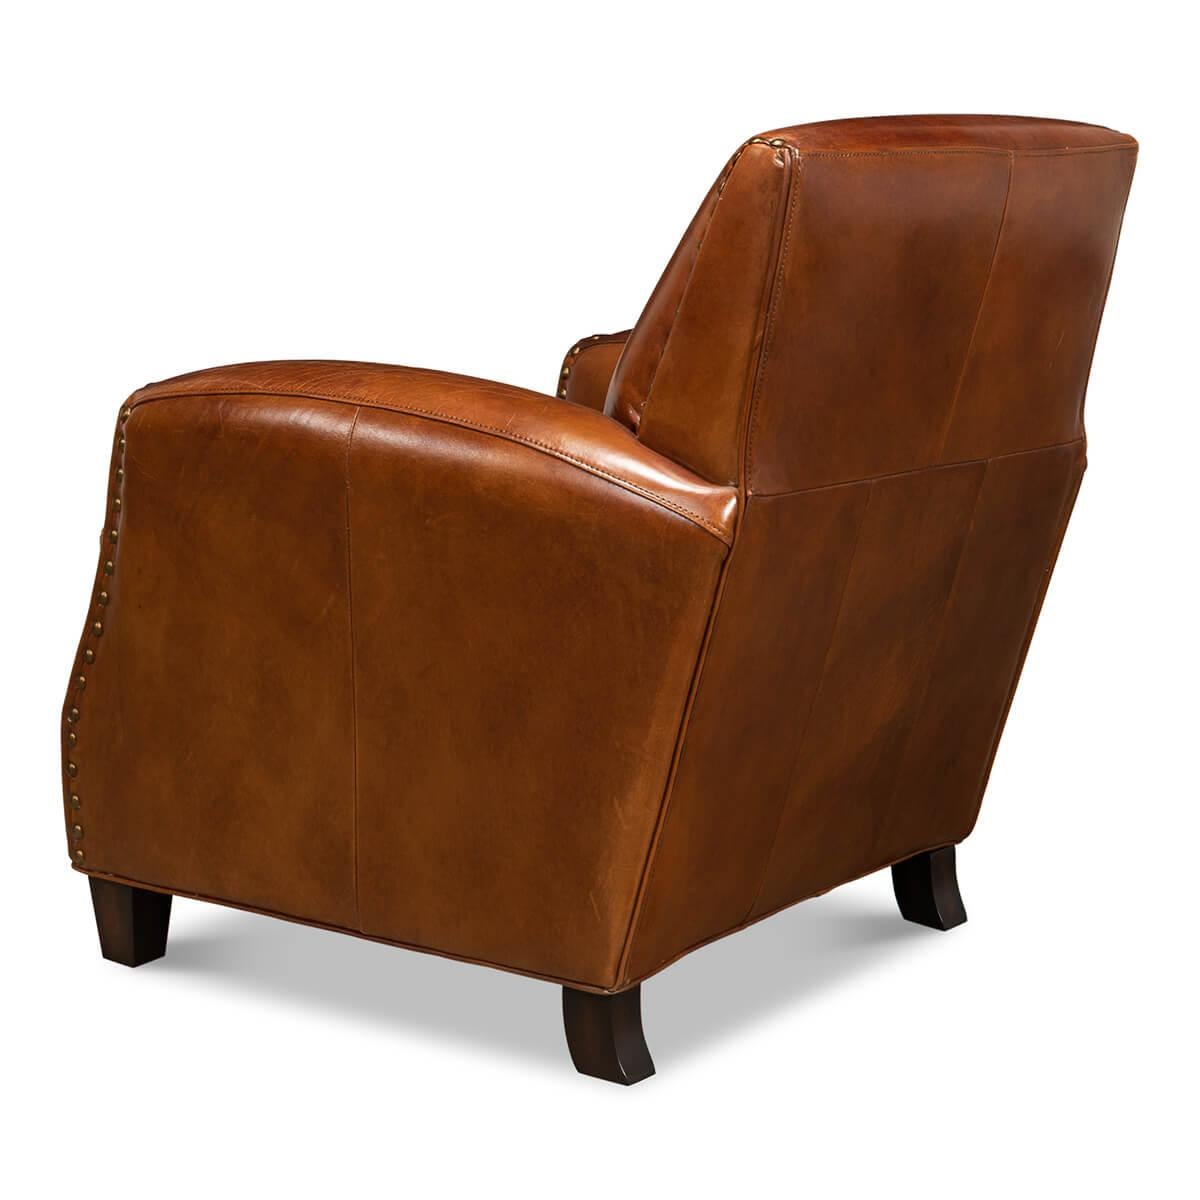 classic leather chair